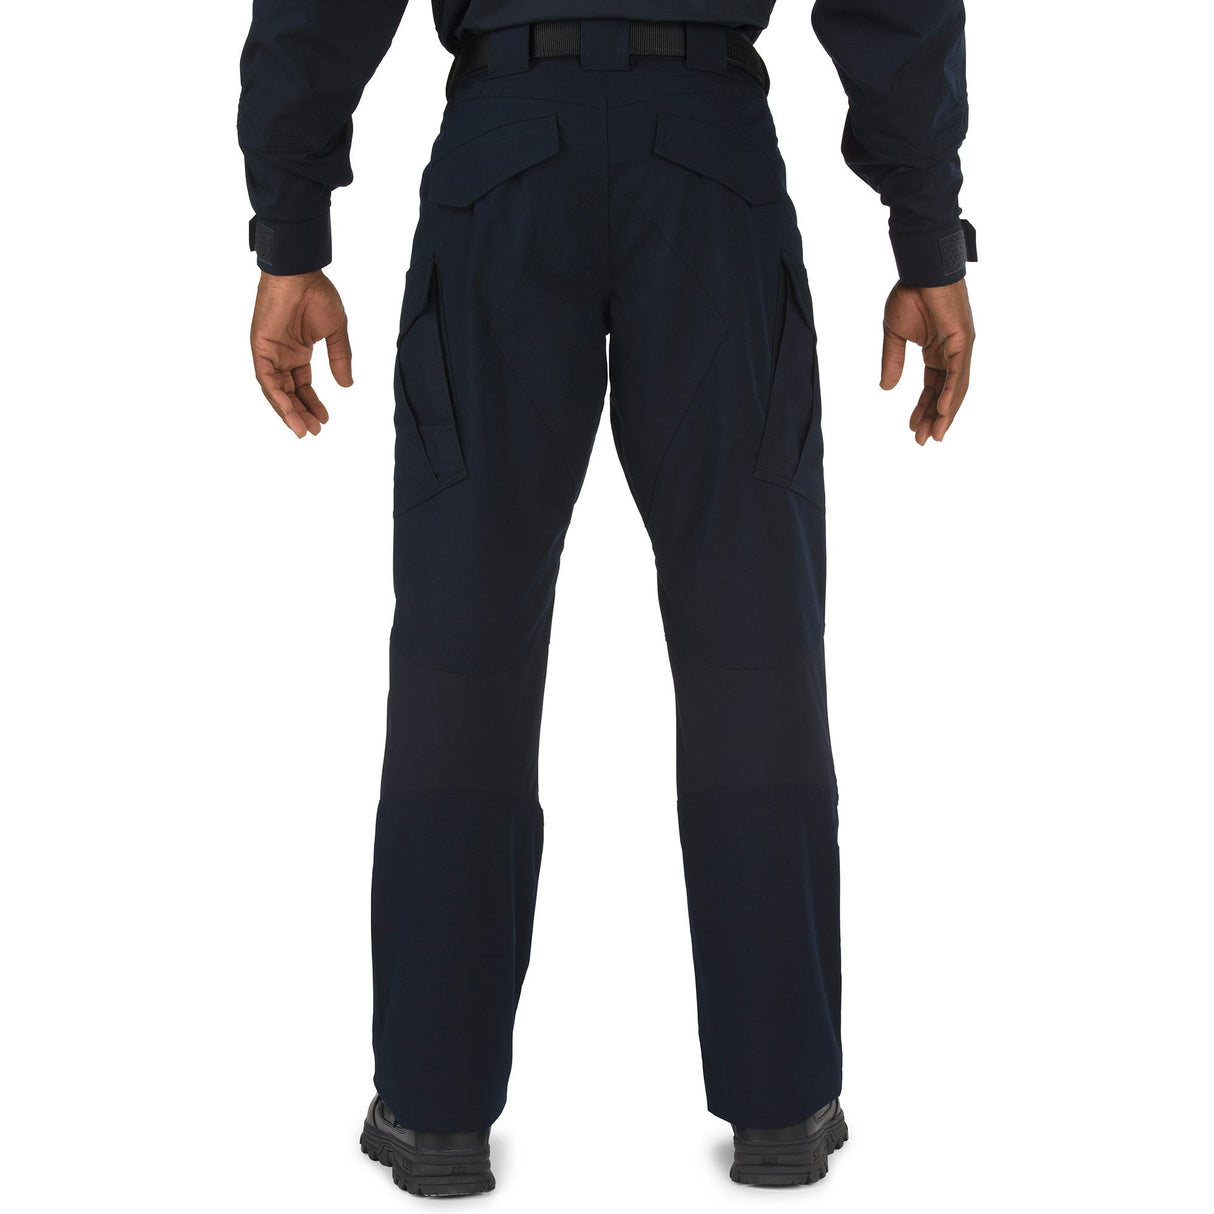 Durable and Comfortable Tactical Pant: Ideal for all-day wear during duty use.